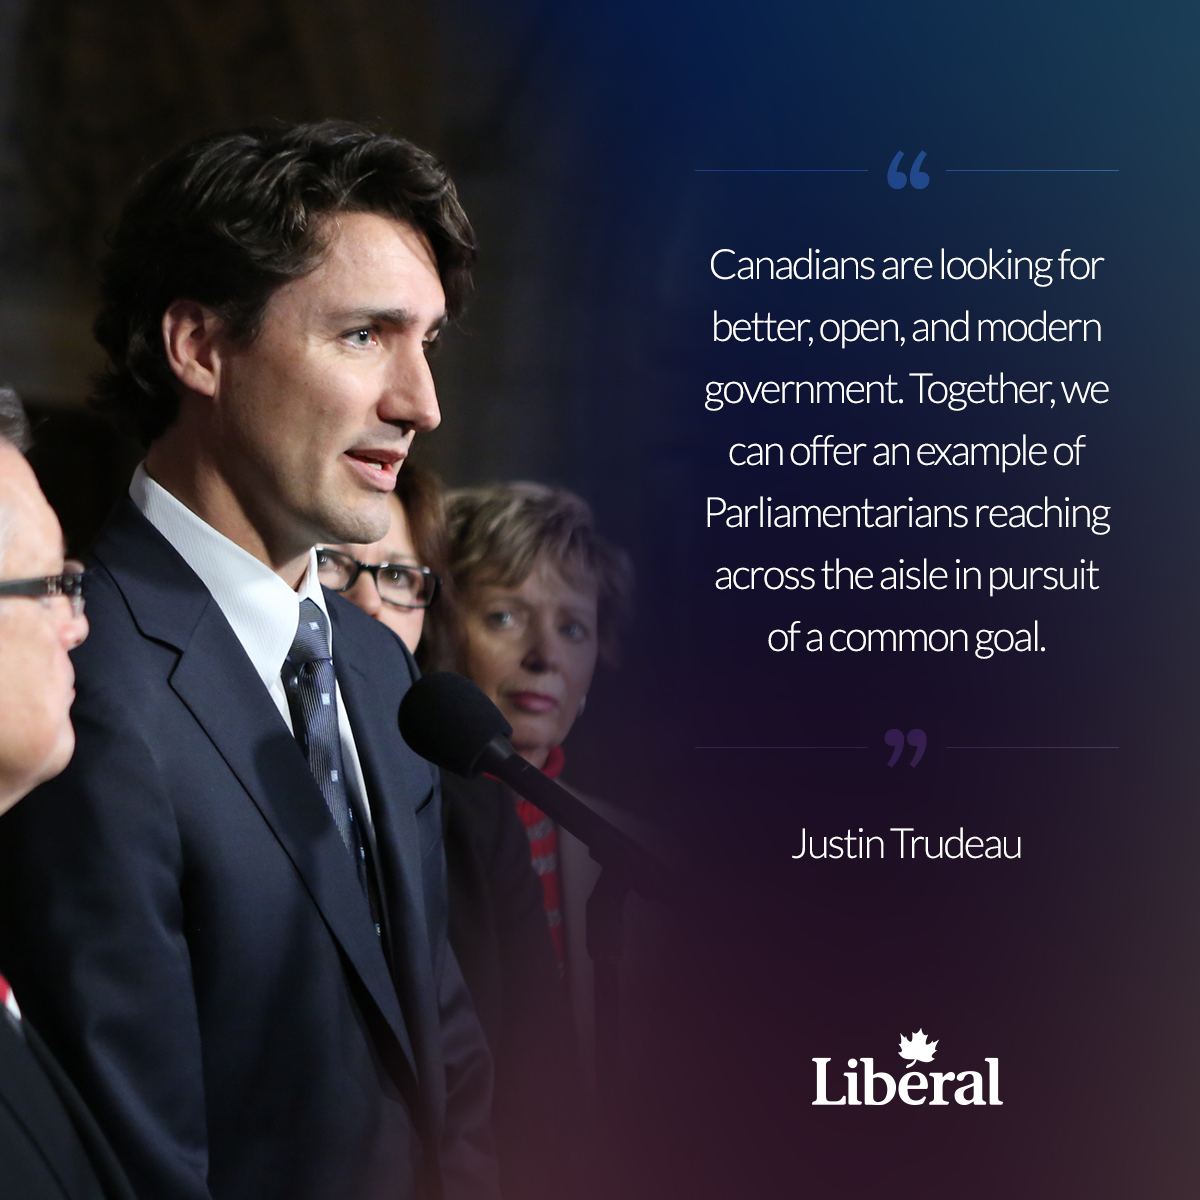 "Canadians are looking for better, open, and modern government. Together, we can offer an example of Parliamentarians reaching across the aisle in pursuit of a common goal." - Justin Trudeau